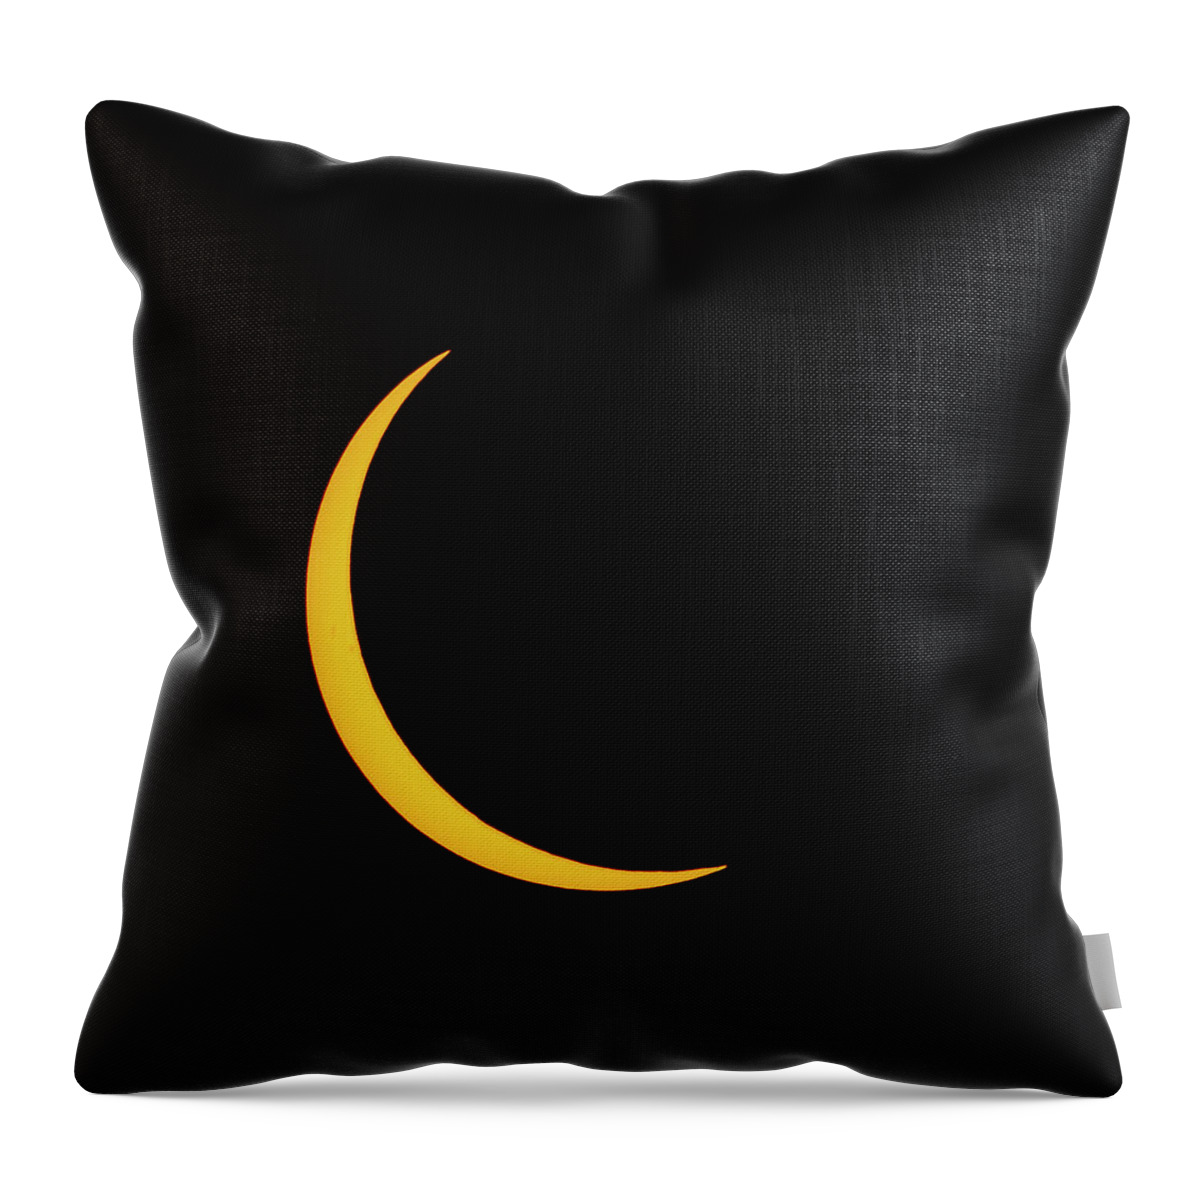 Solar Eclipse Throw Pillow featuring the photograph Partial Solar Eclipse by David Beechum